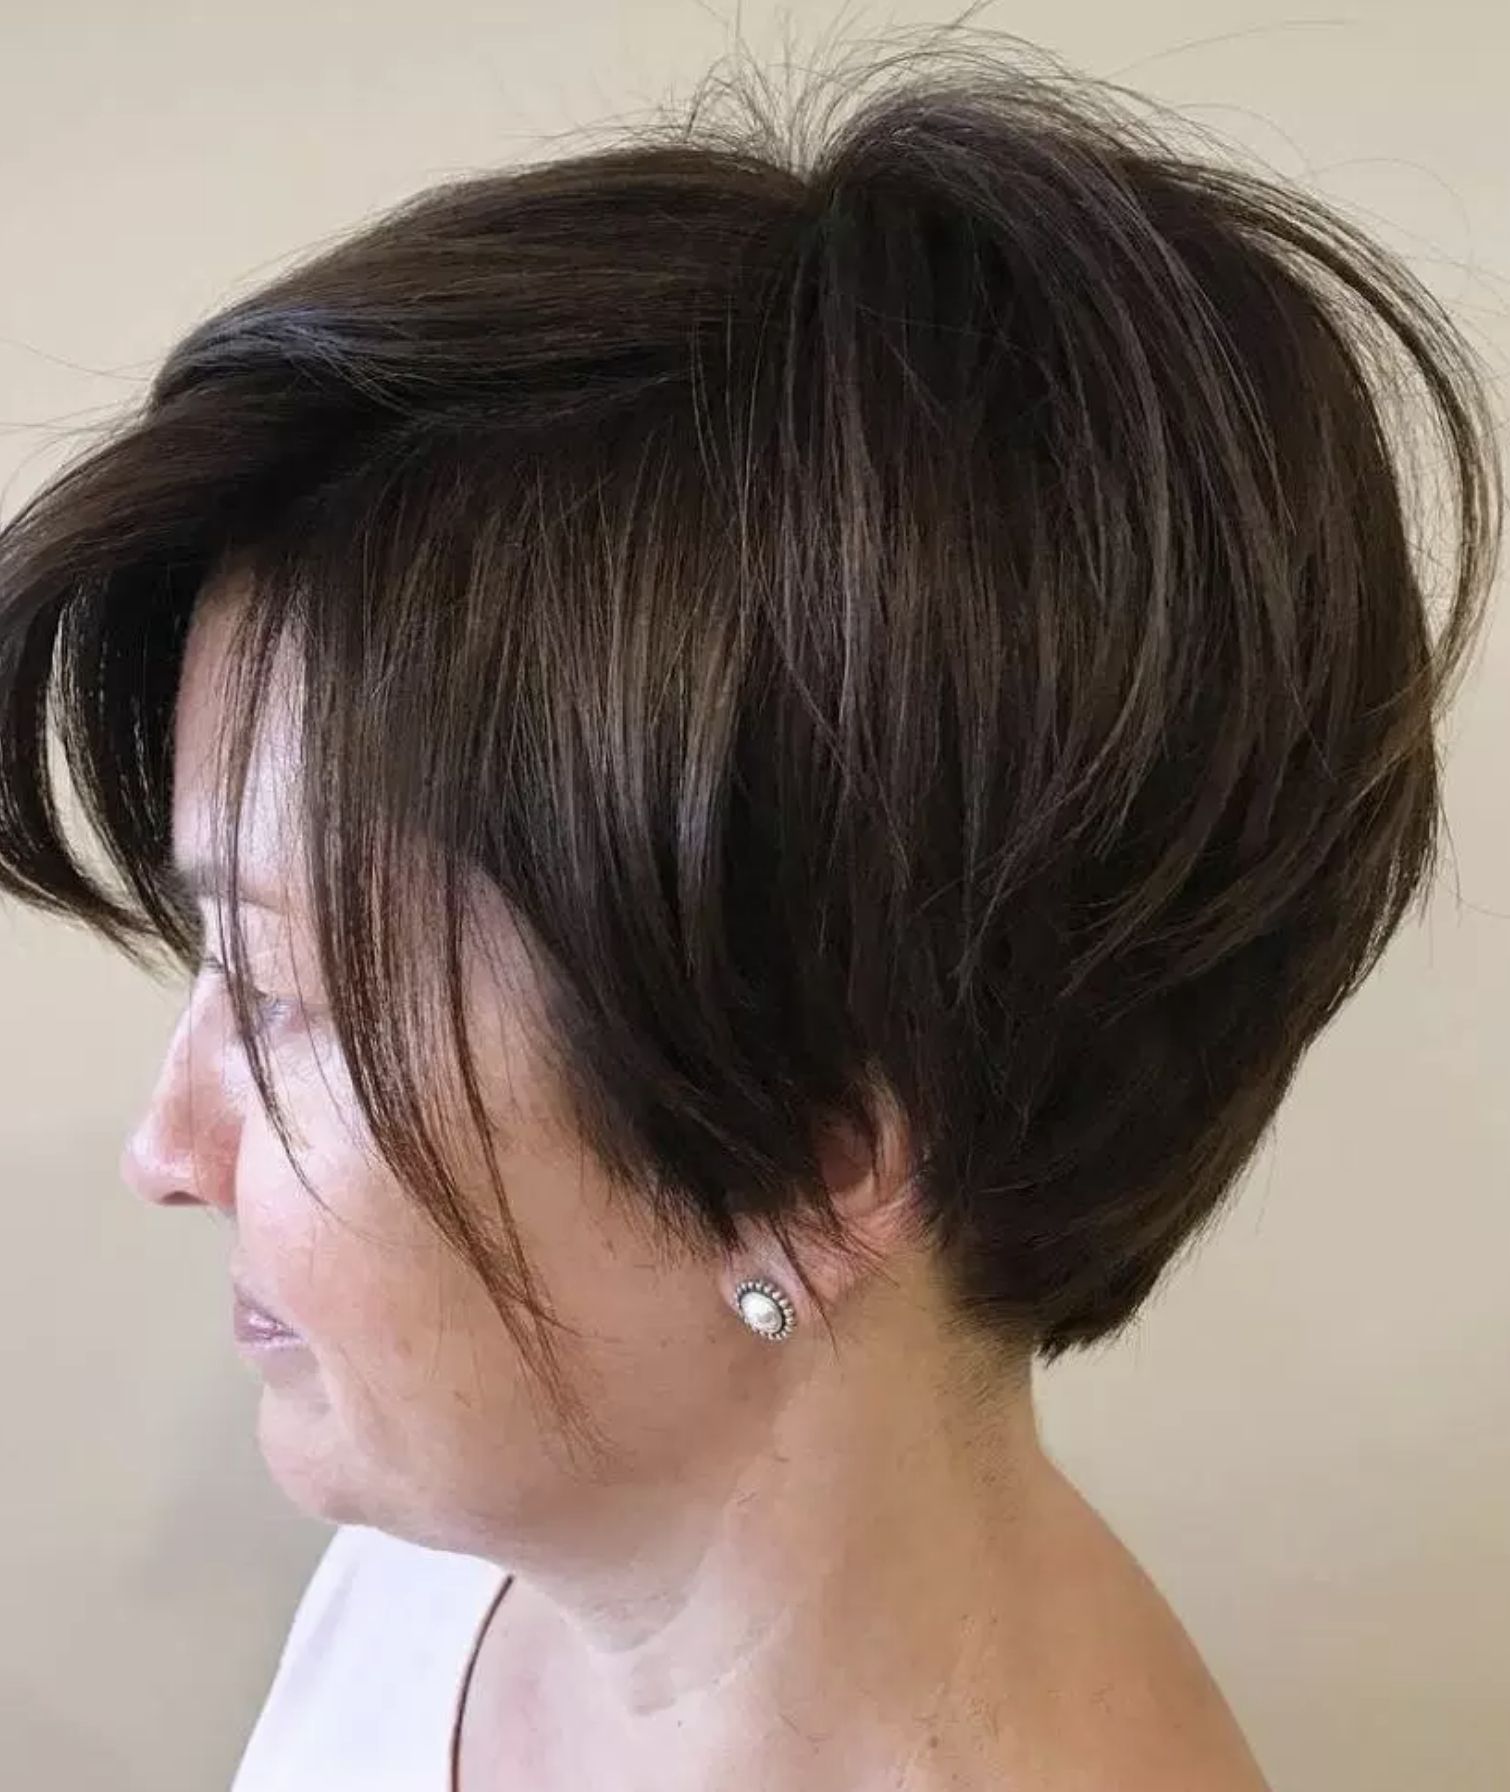 Short Hairstyles For Women Over 40 Many Women In Their 40s Opt For Inside Short Hairstyles For Women In Their 40s (Photo 21 of 25)